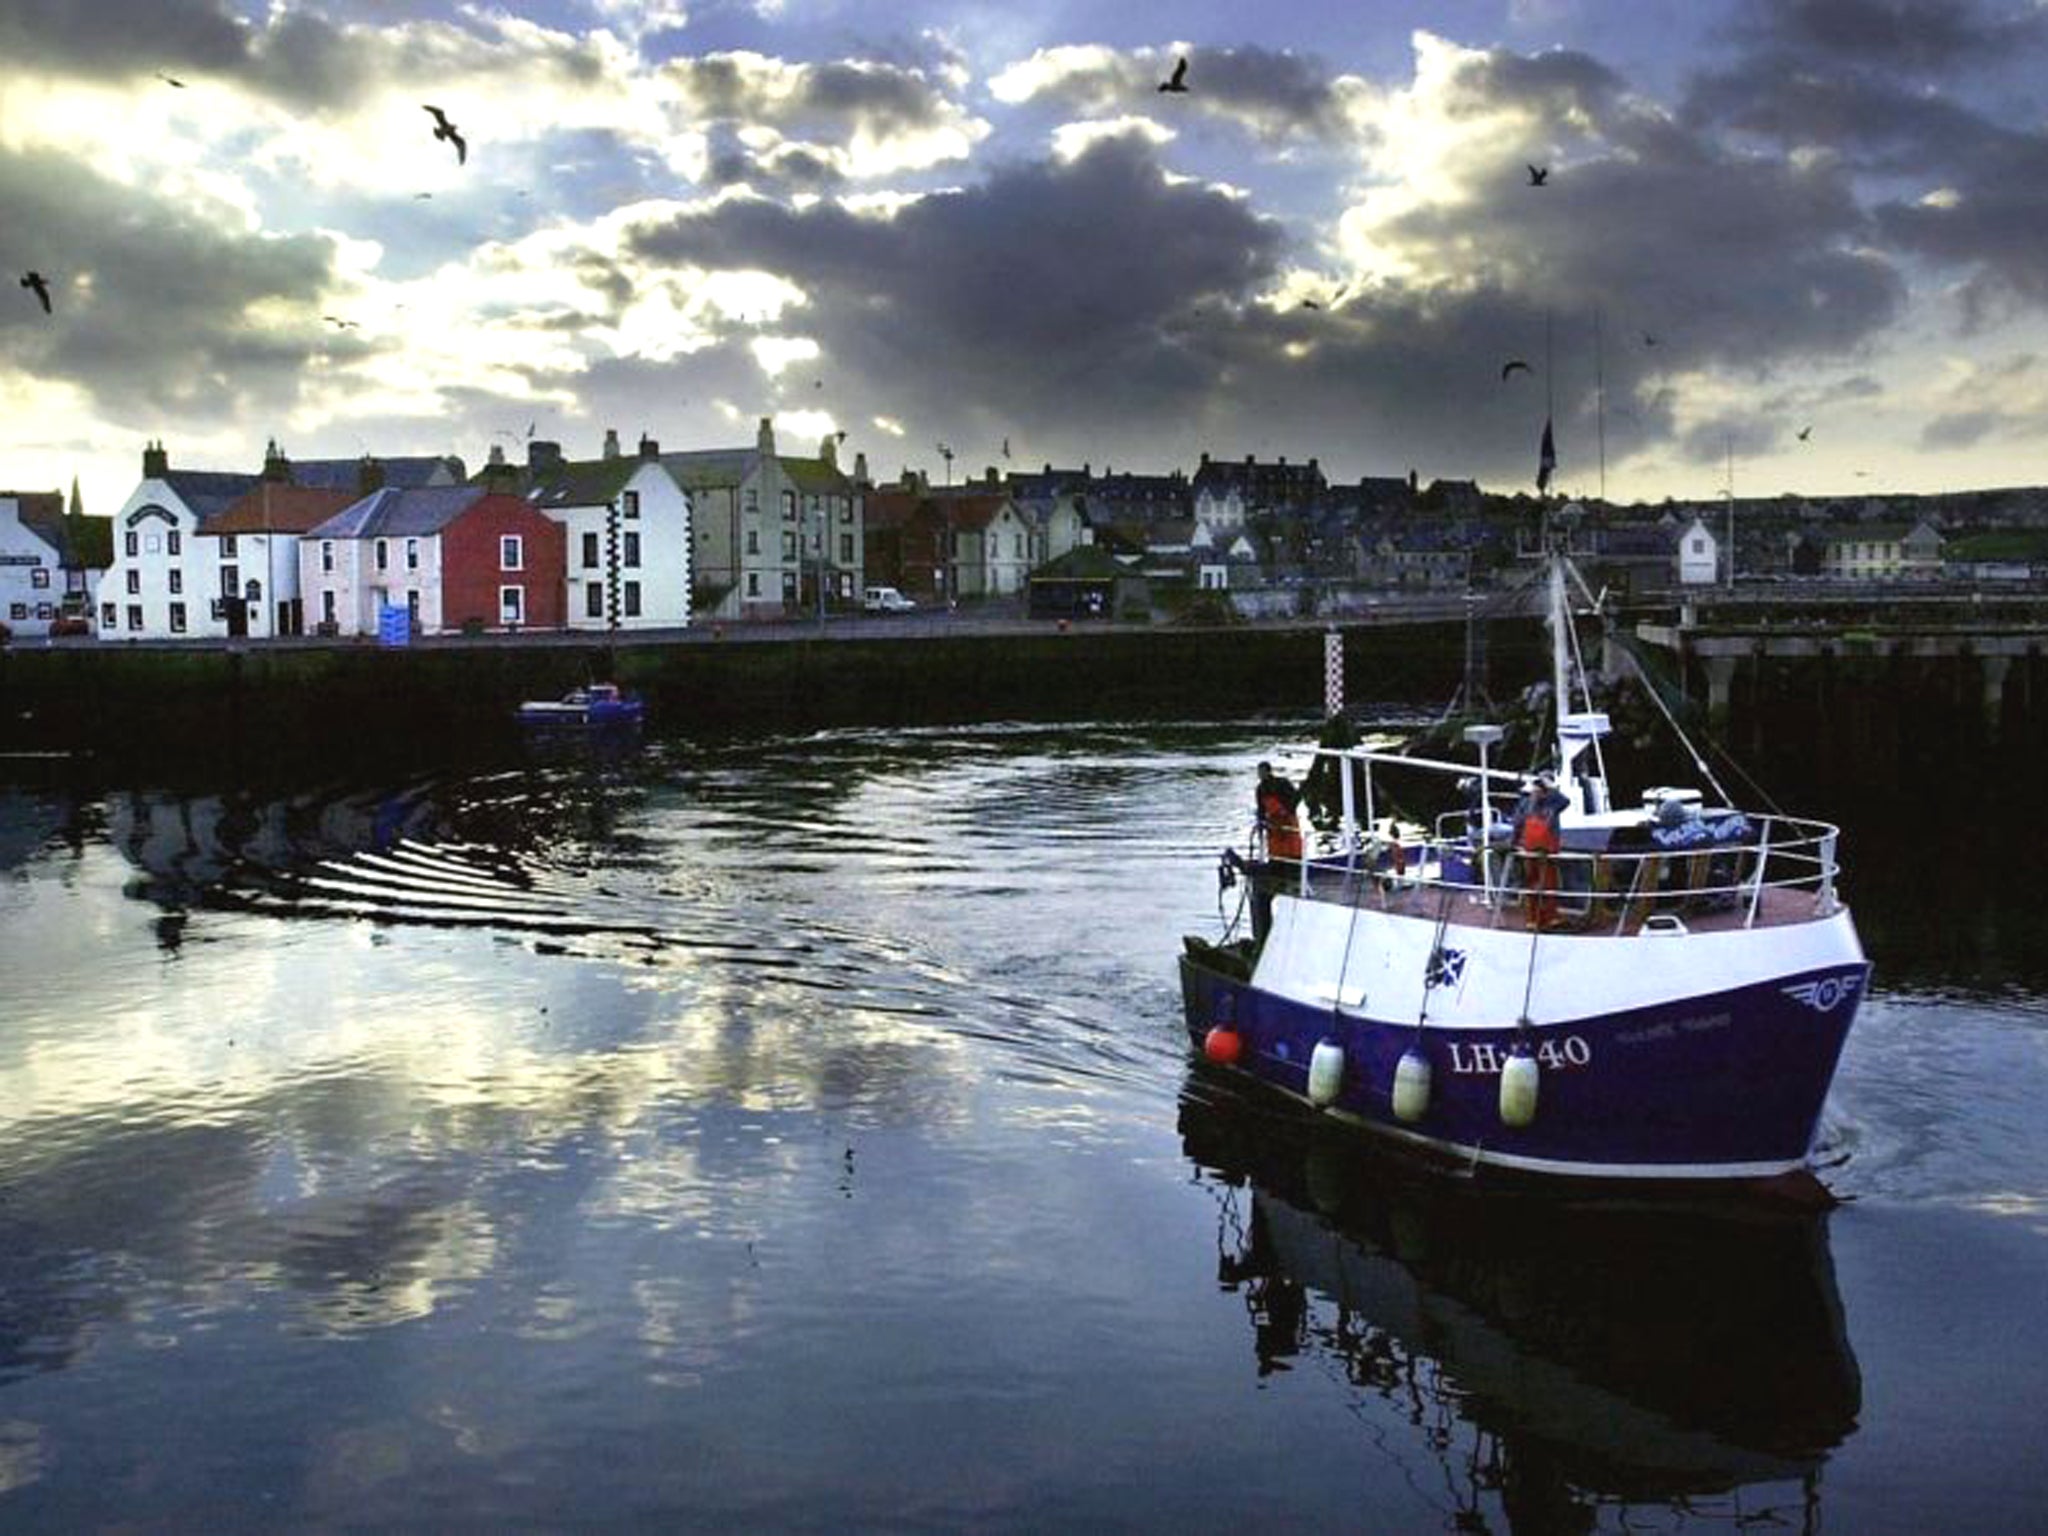 The High Court has ruled in favour of reallocating some fishing rights from big producers to small-scale fishermen